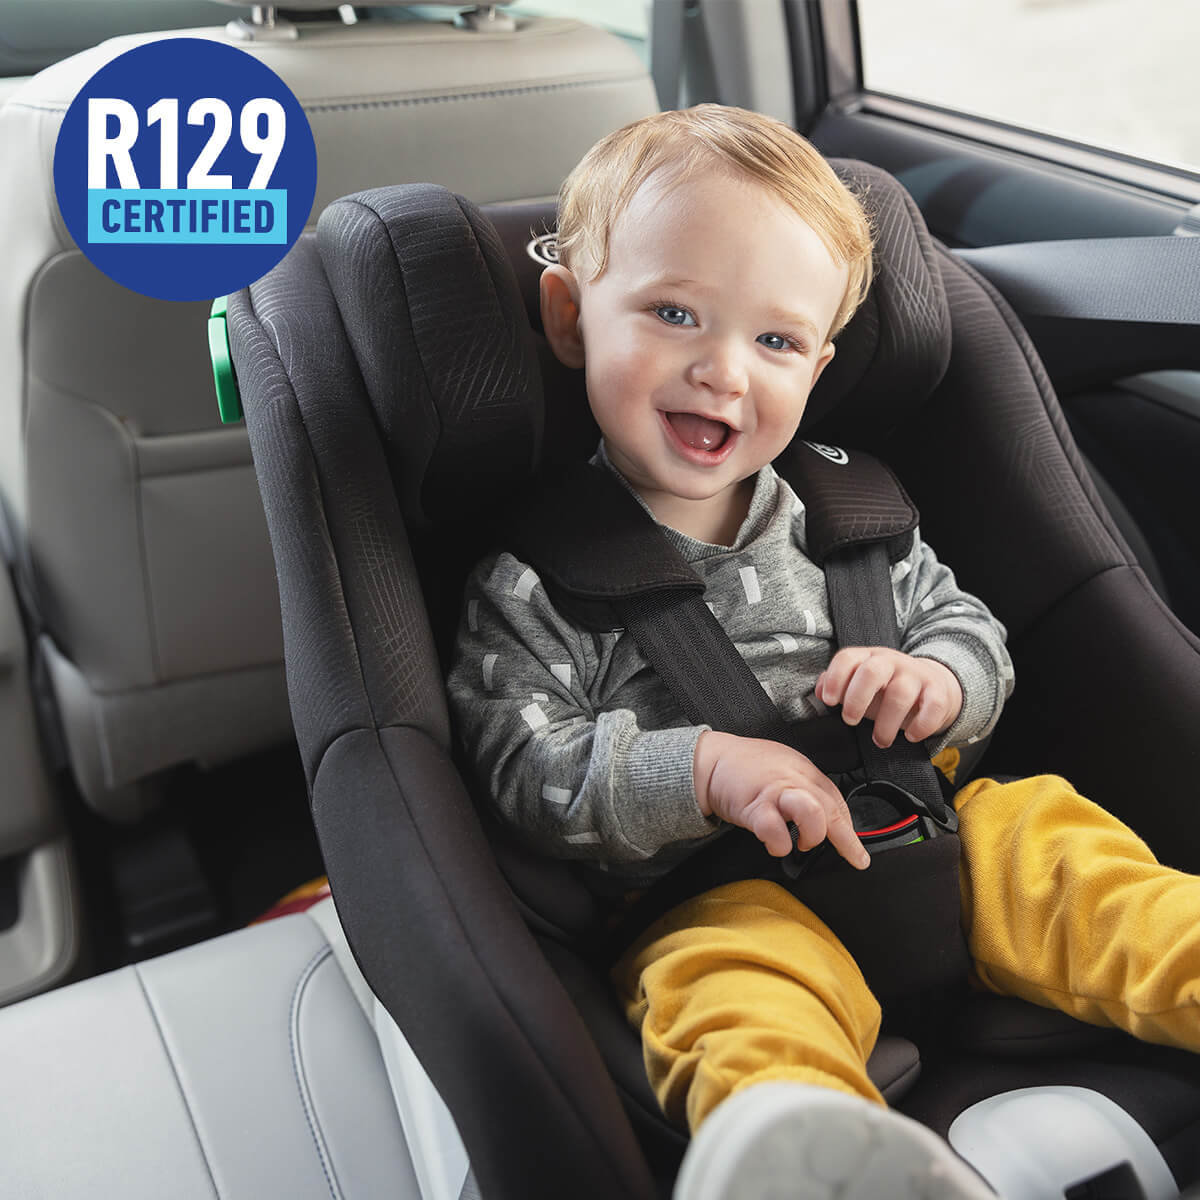 Smiley baby in Graco Extend LX R129 in car with R129 certified logo. 